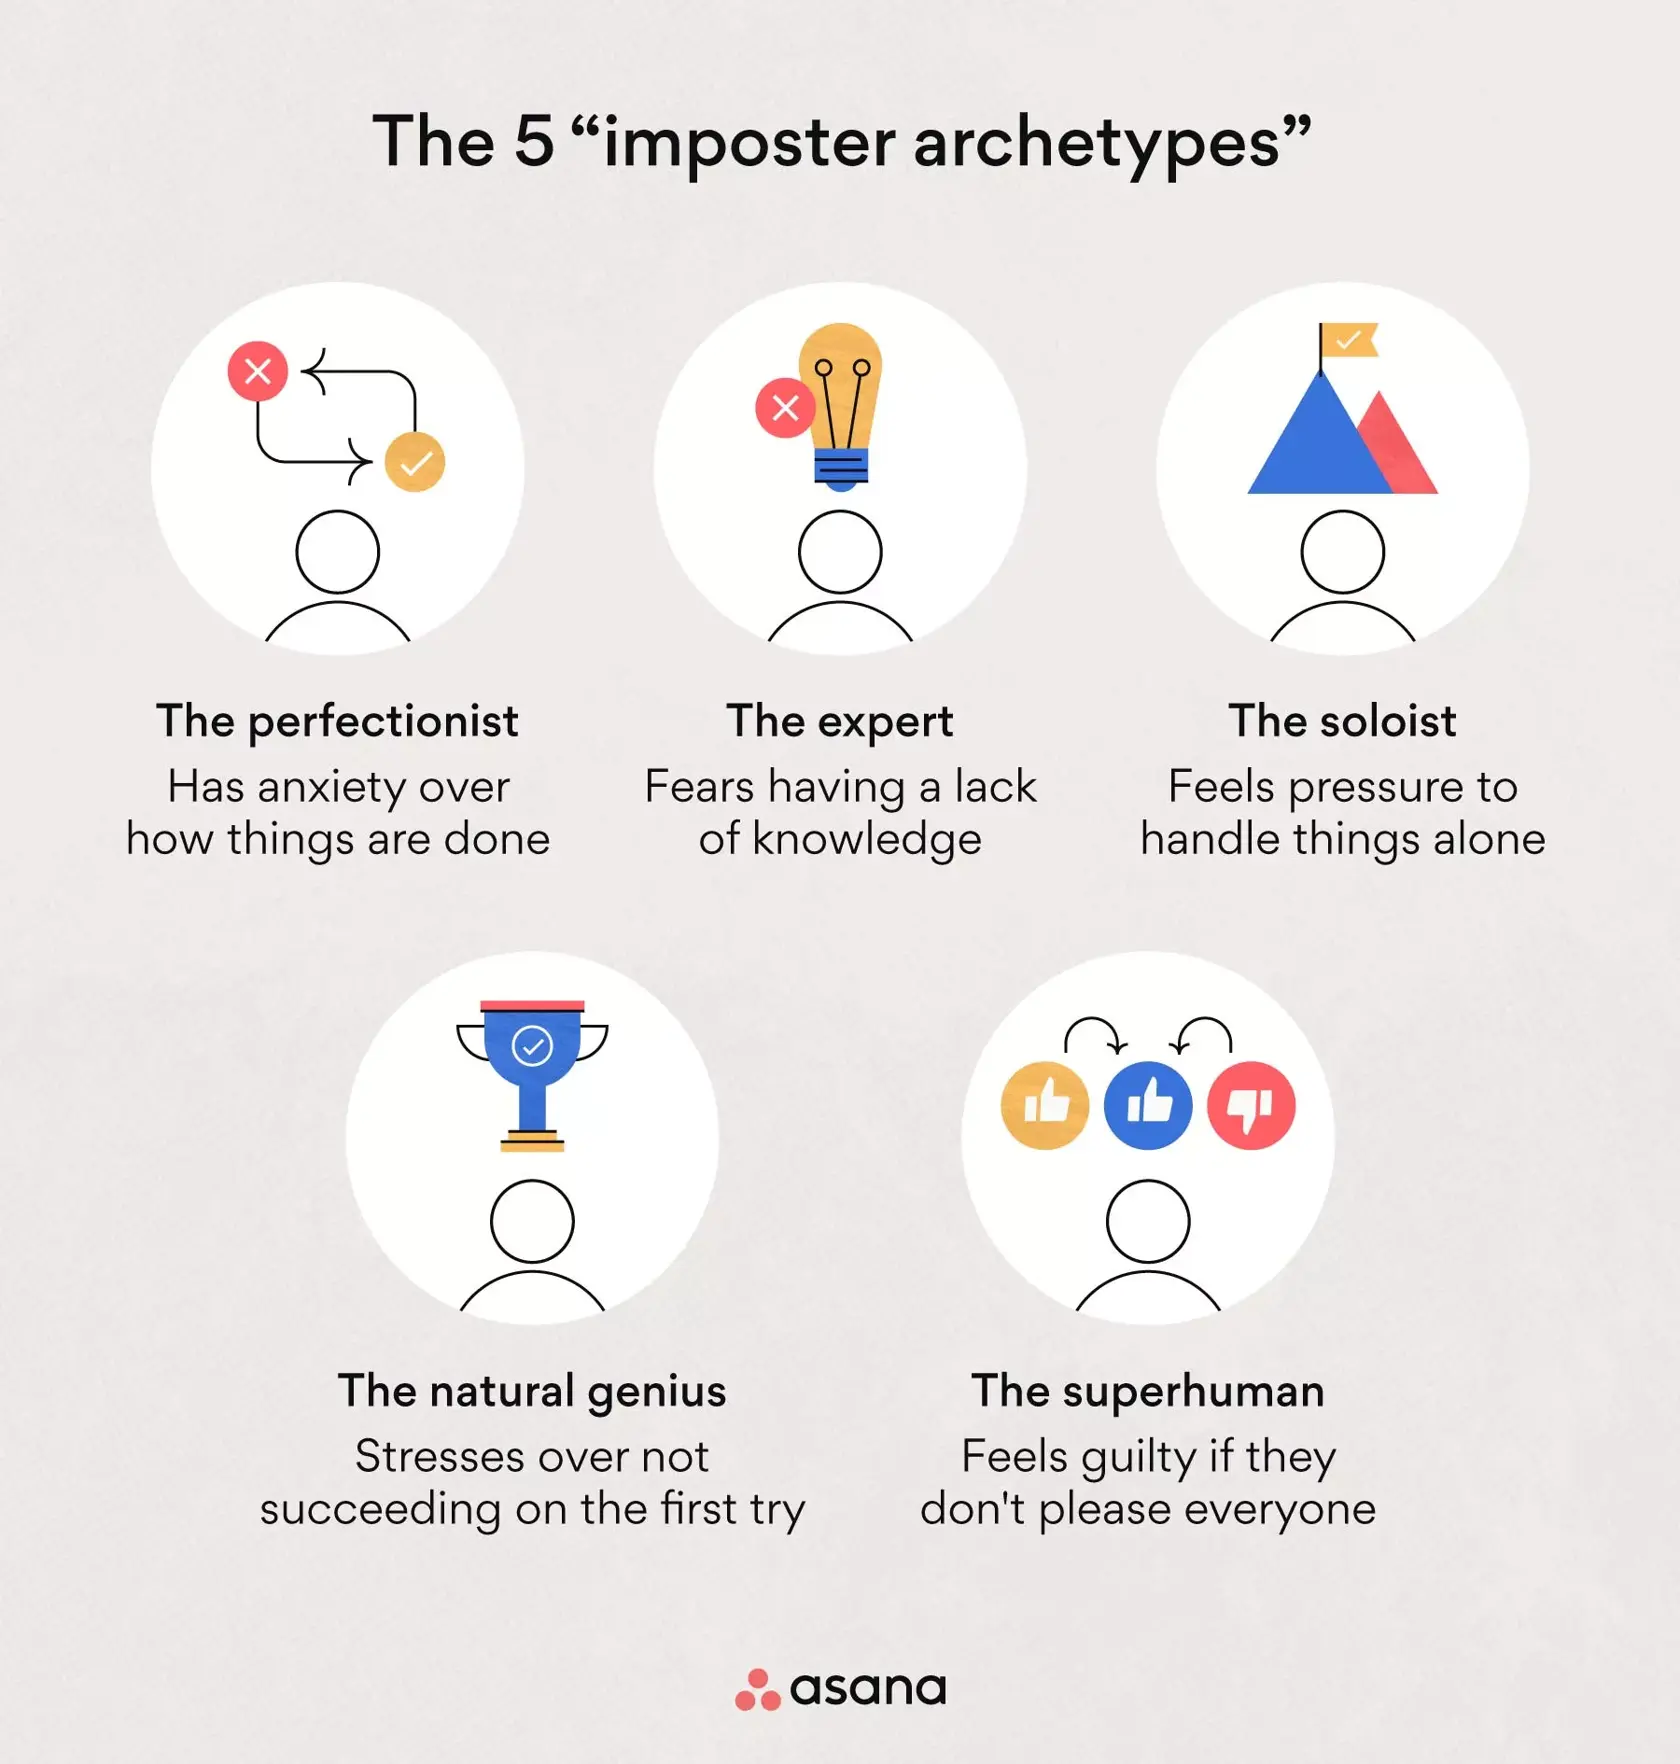 The 5 “imposter archetypes” are the perfectionist, the expert, the soloist, the natural genius, and the superhuman.
Imposter syndrome symptoms blog by Inspired Idiots.